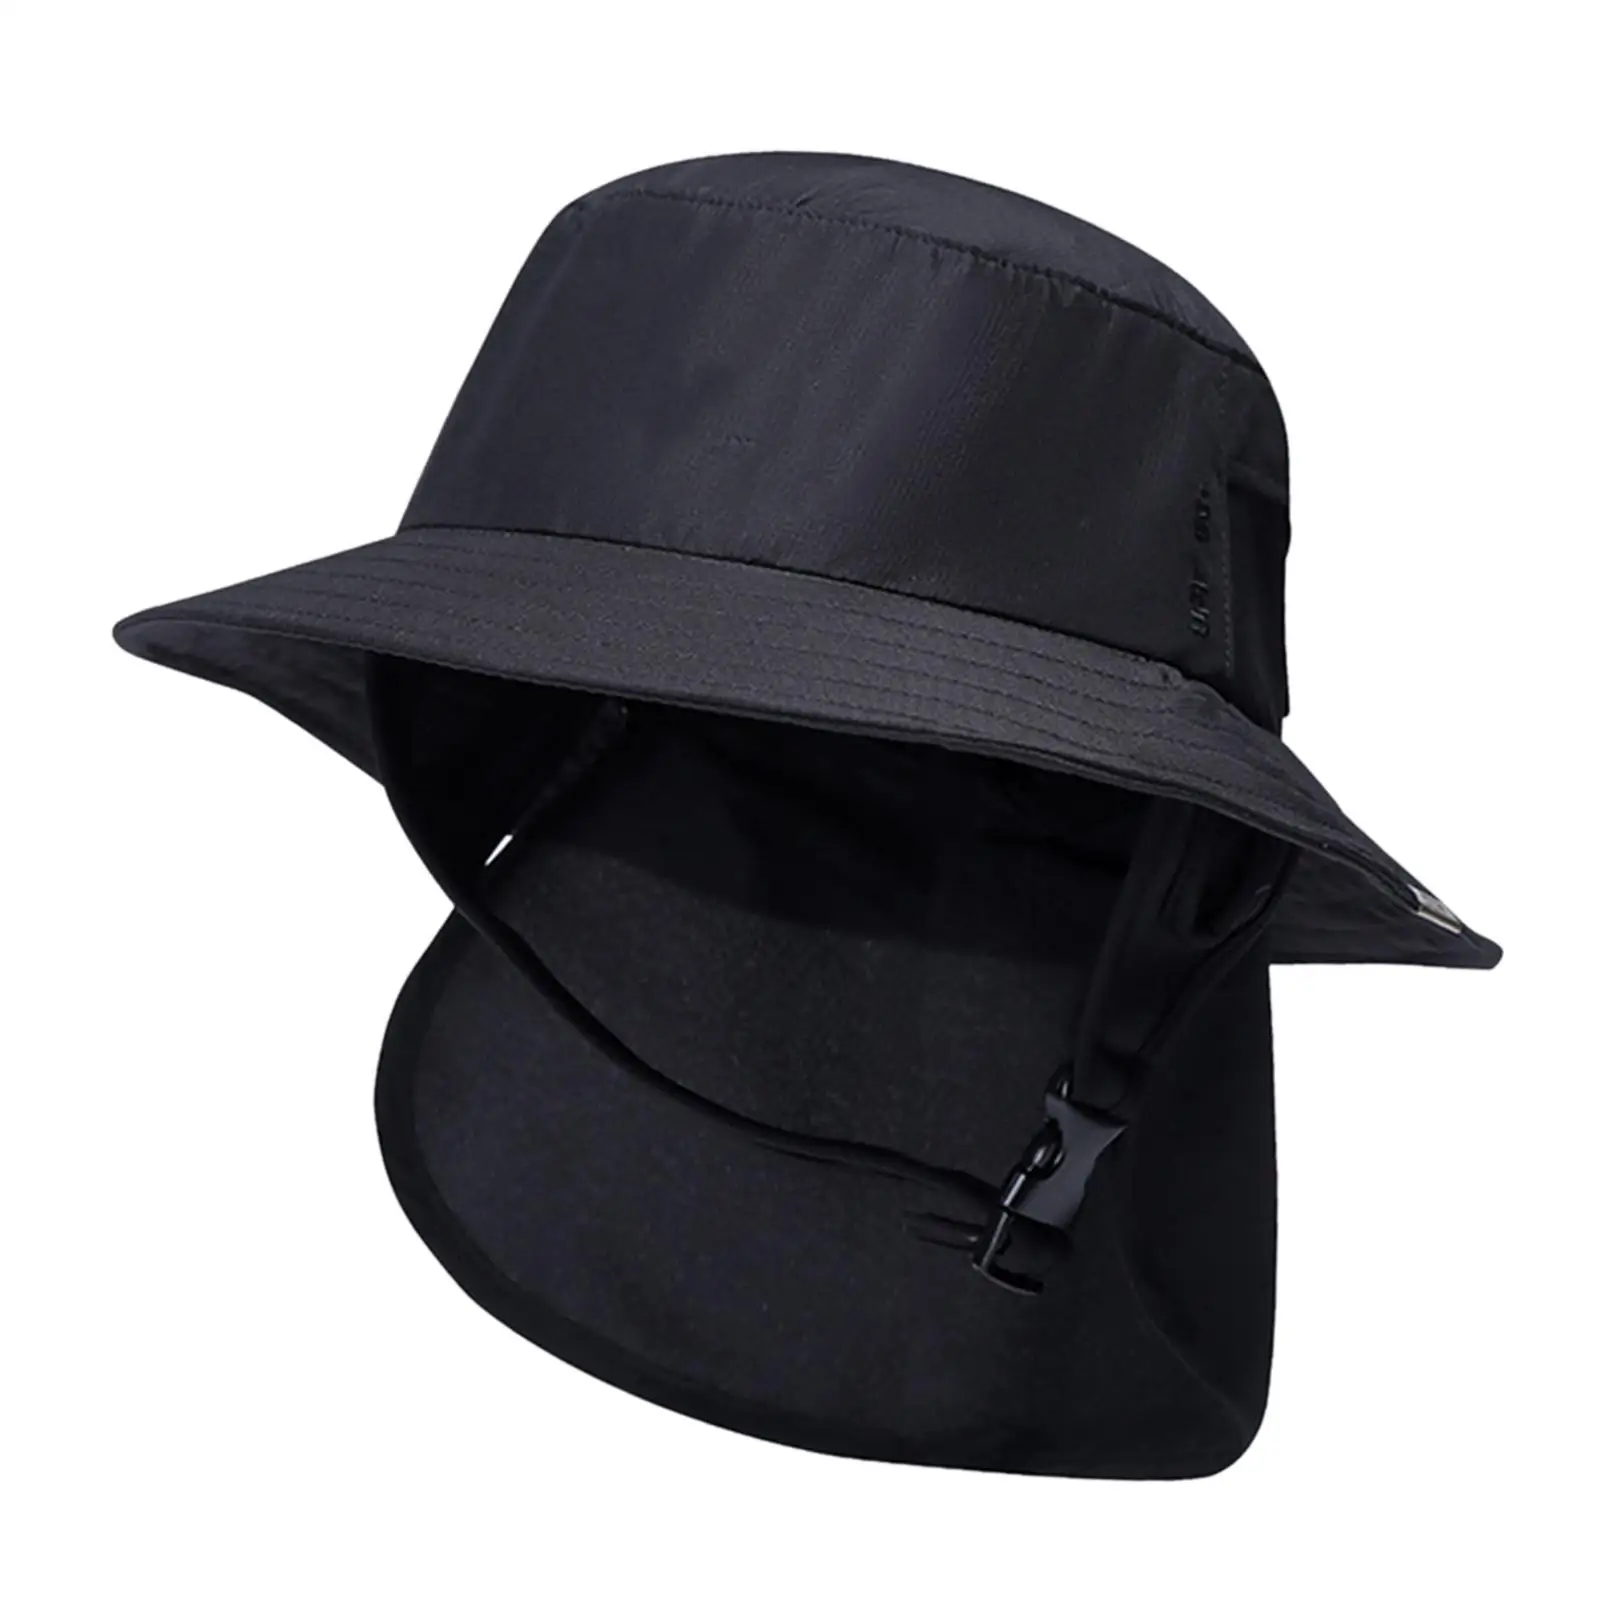 Lightweight Surf Bucket Hat Neck Flap Cover for Fishing Travel Water Sports